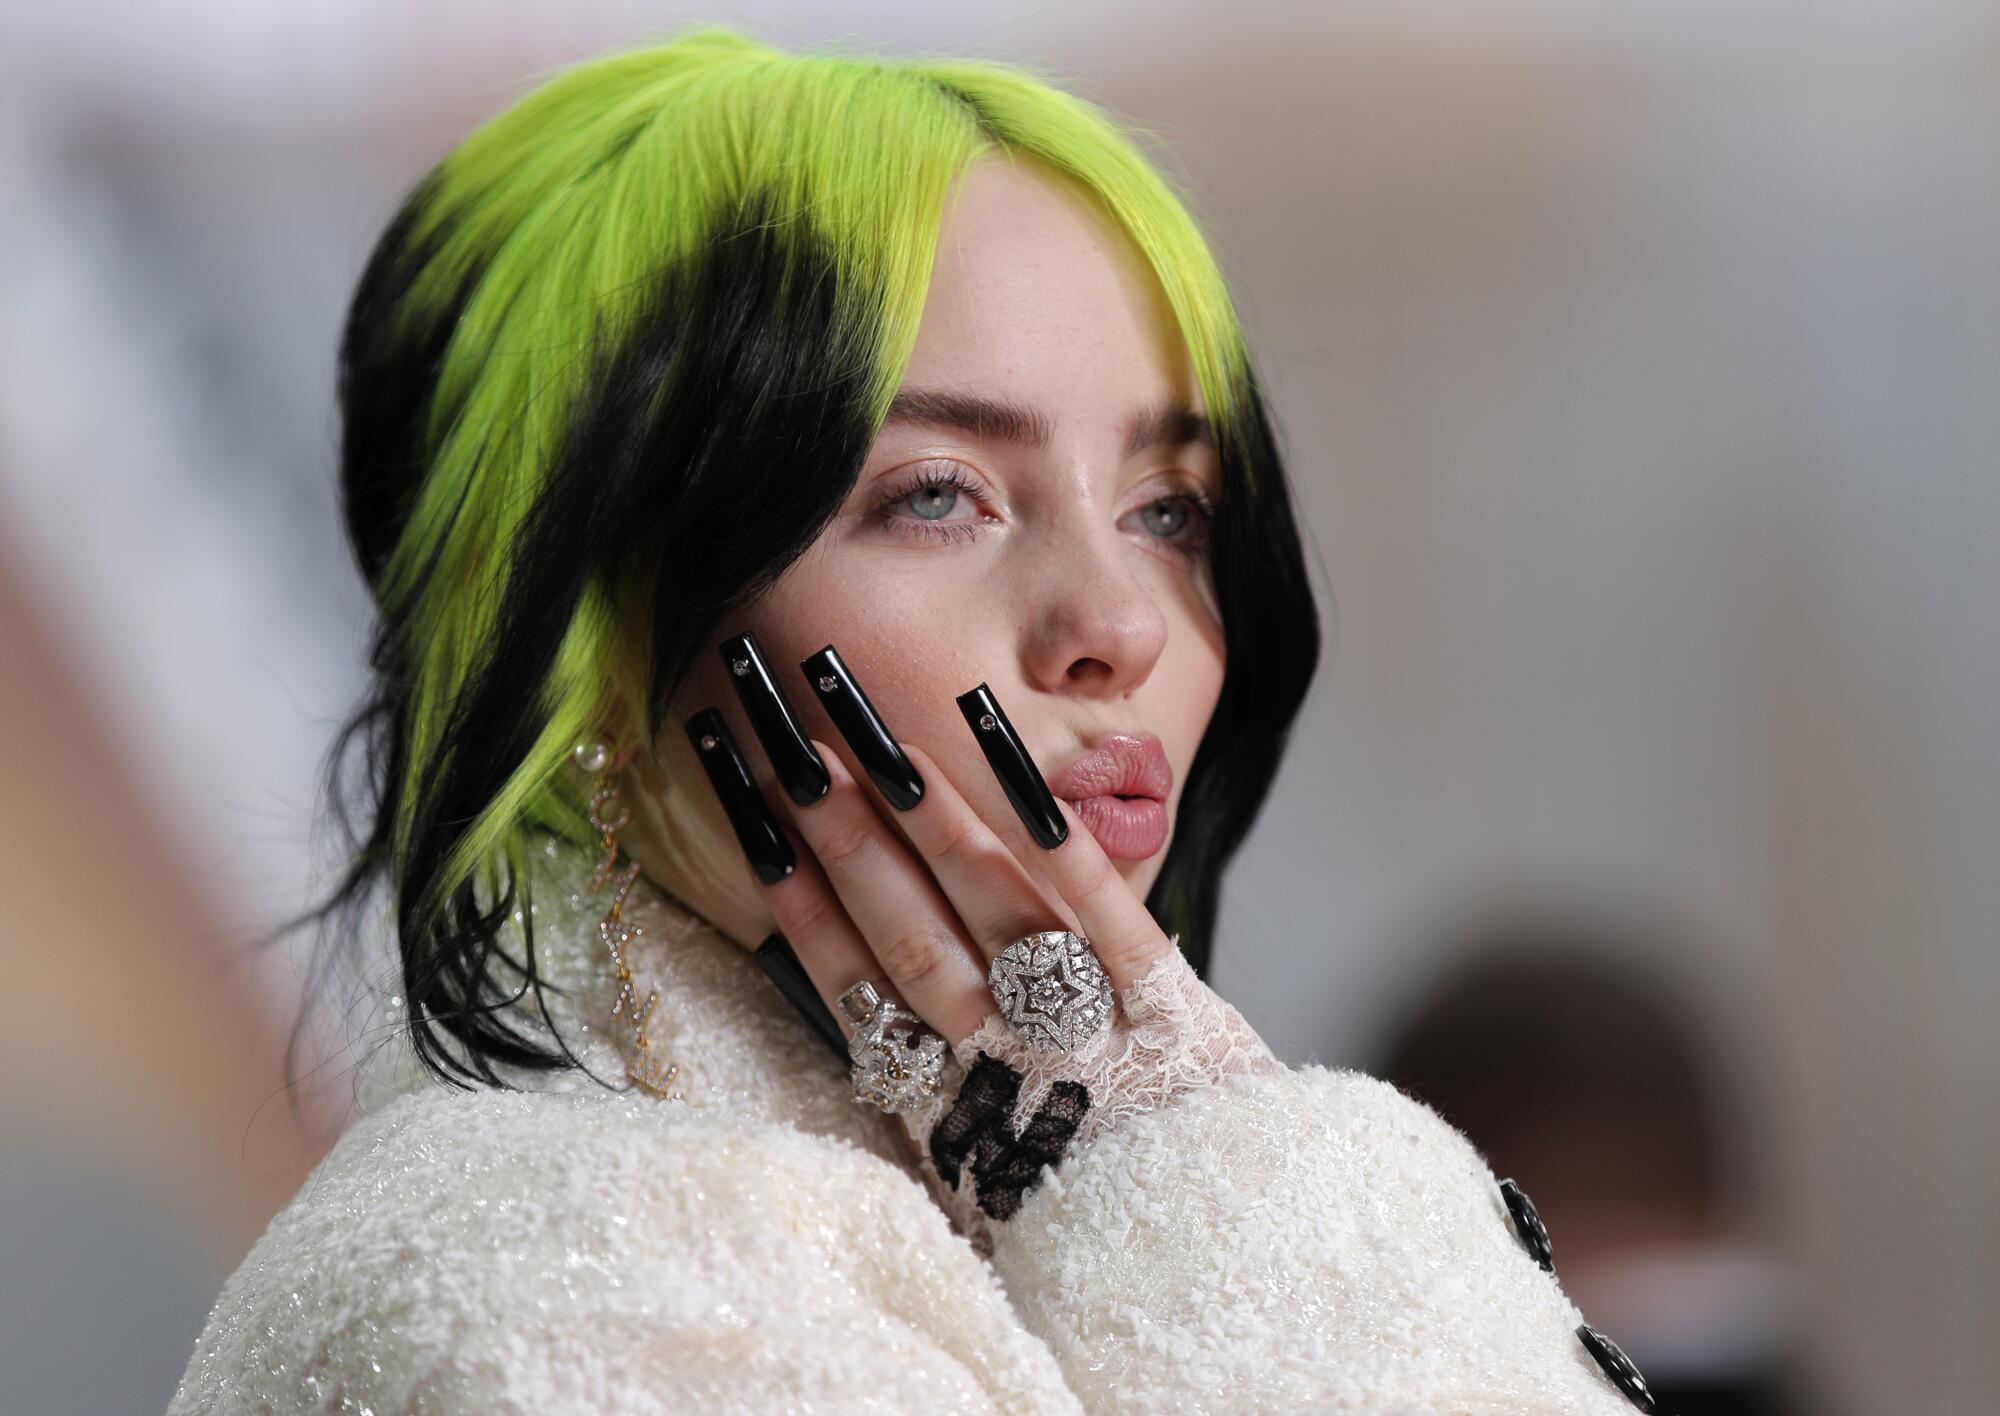 A woman with green and black hair raises a hand with long black nails to her face.